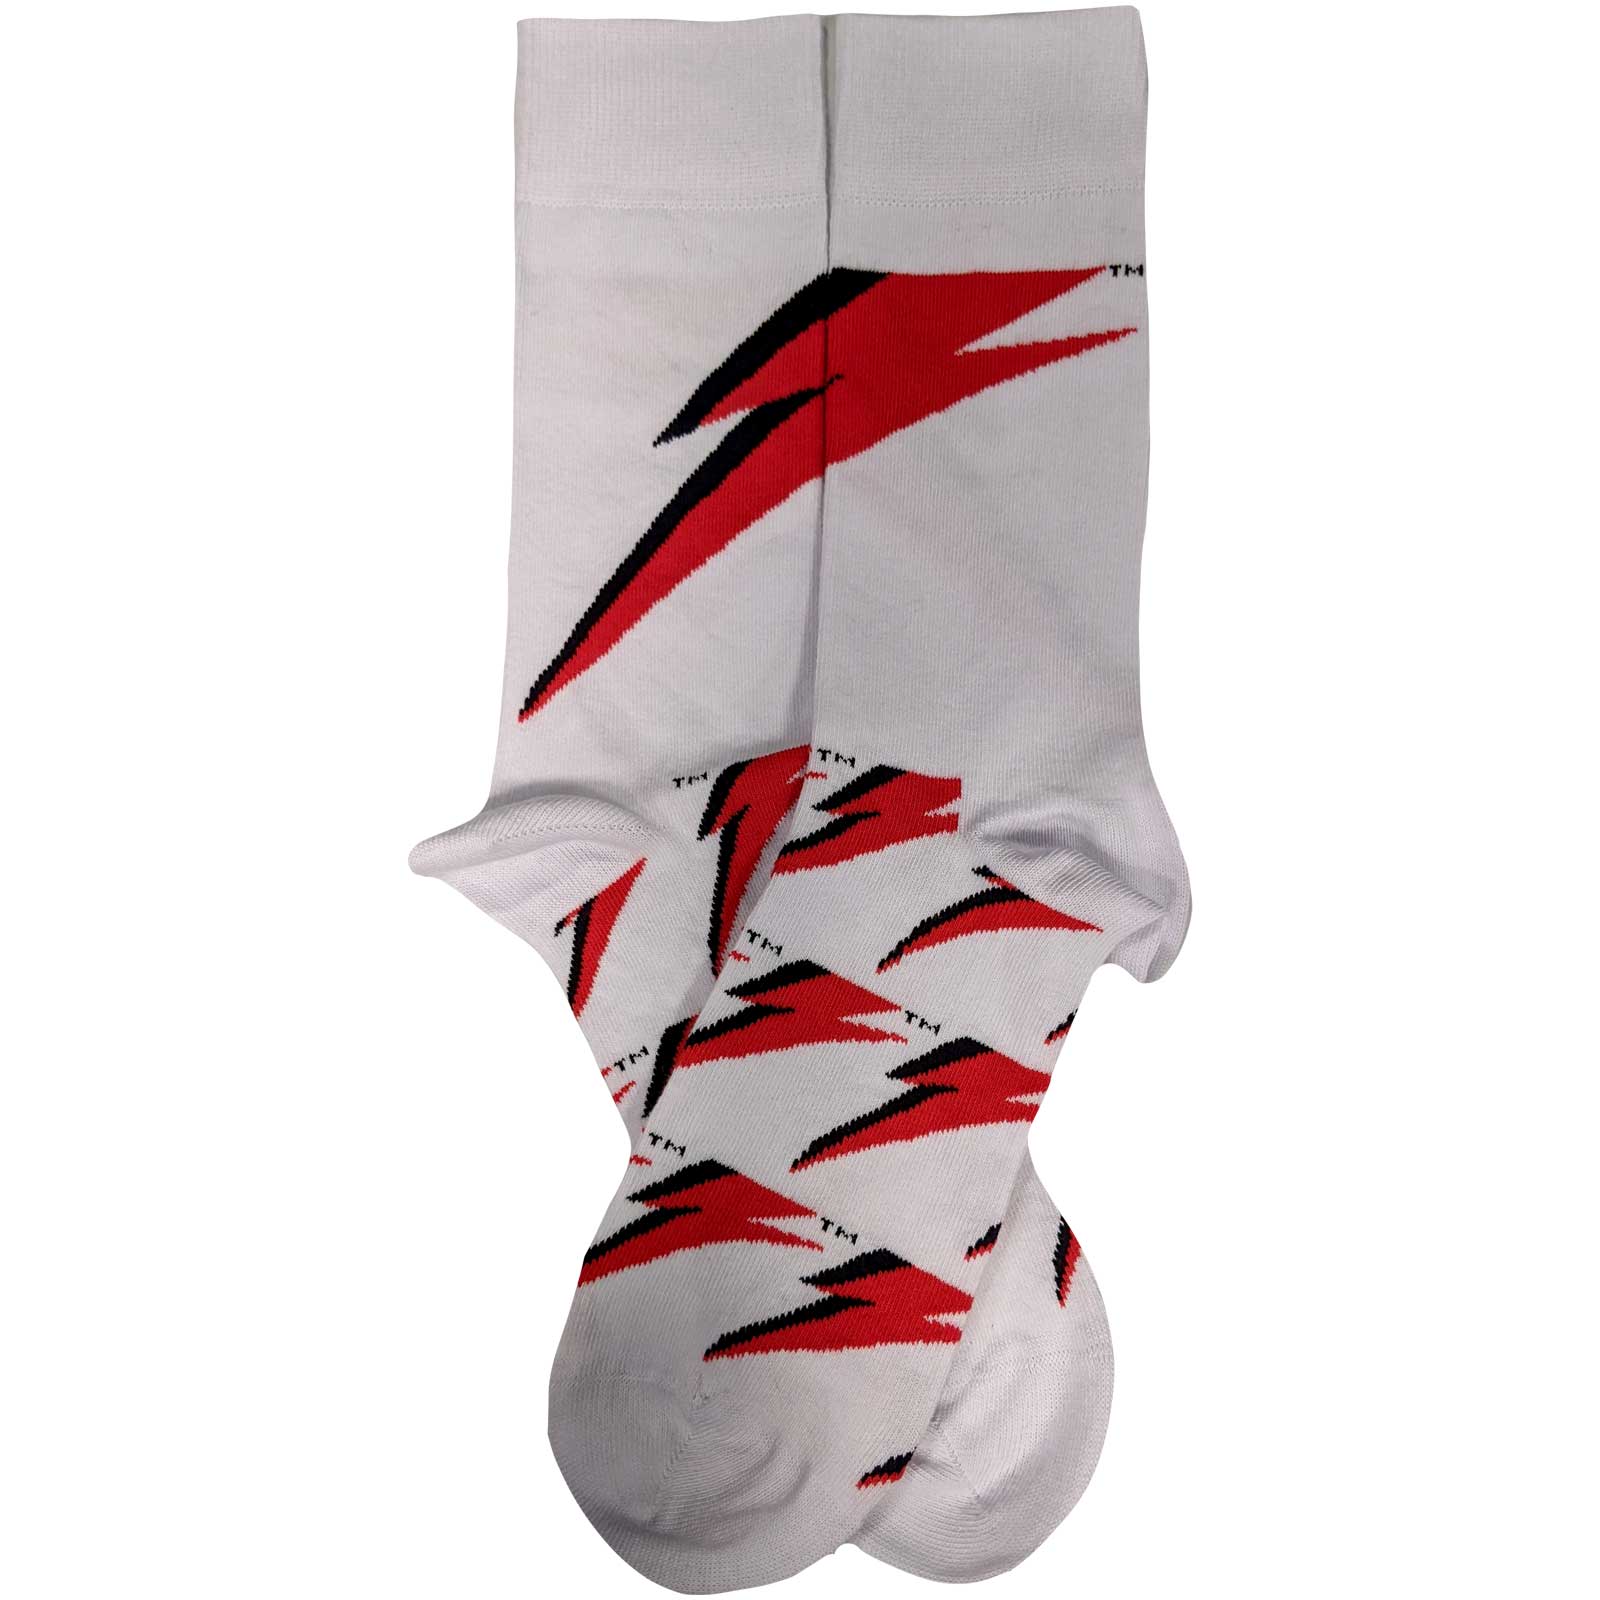 OFFICIAL BAND MERCH DAVID BOWIE UNISEX ANKLE SOCKS: FLASH